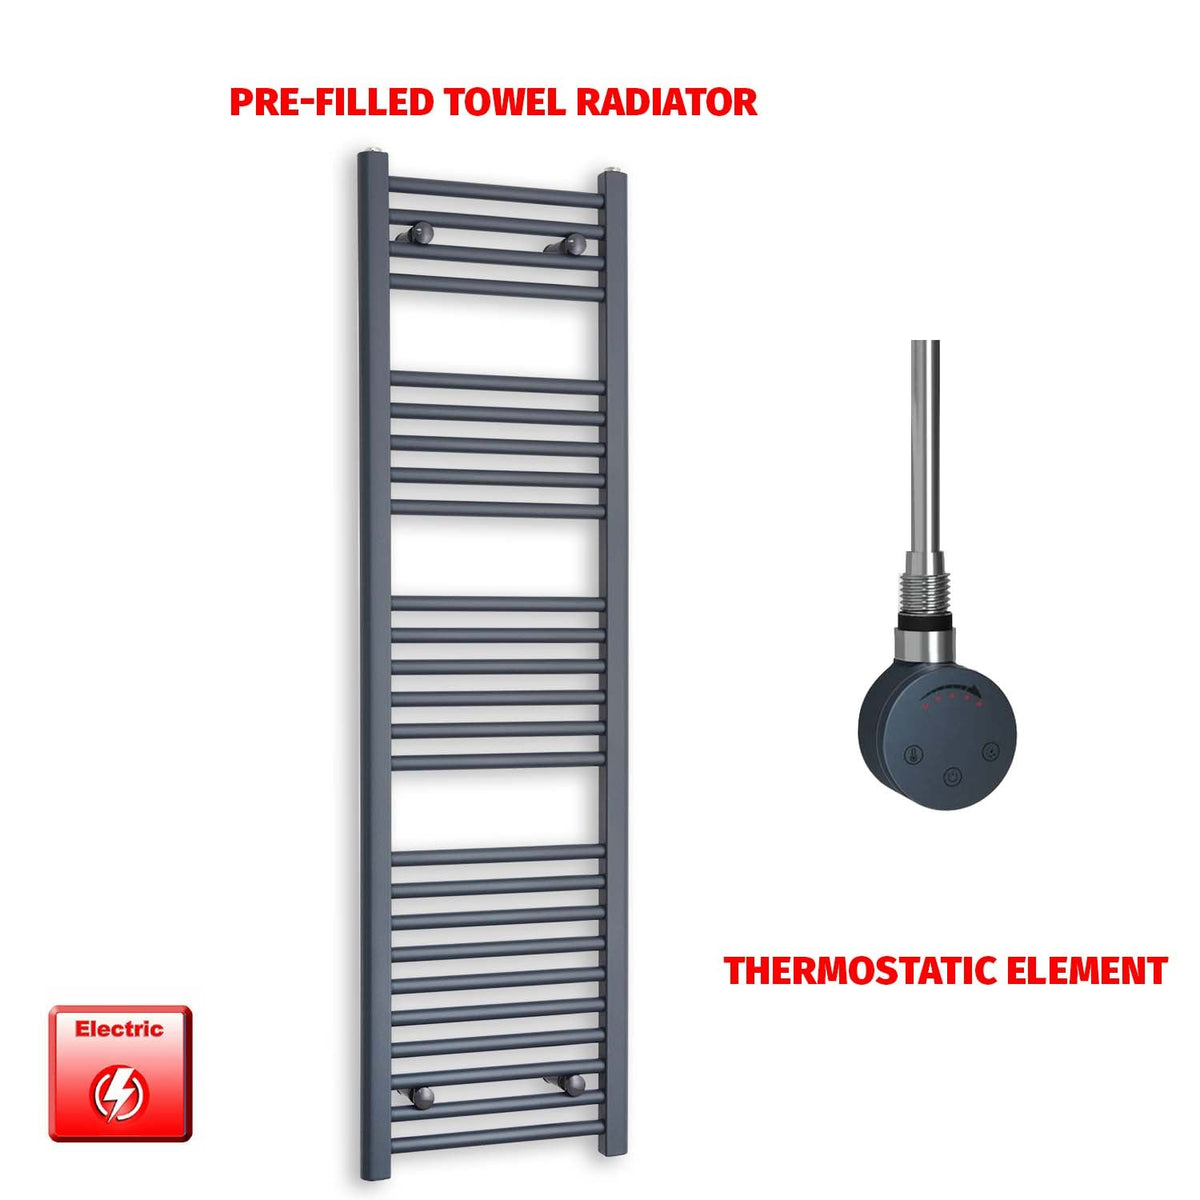 1400mm High 400mm Wide Flat Anthracite Pre-Filled Electric Heated Towel Radiator SMR Thermostatic element no timer